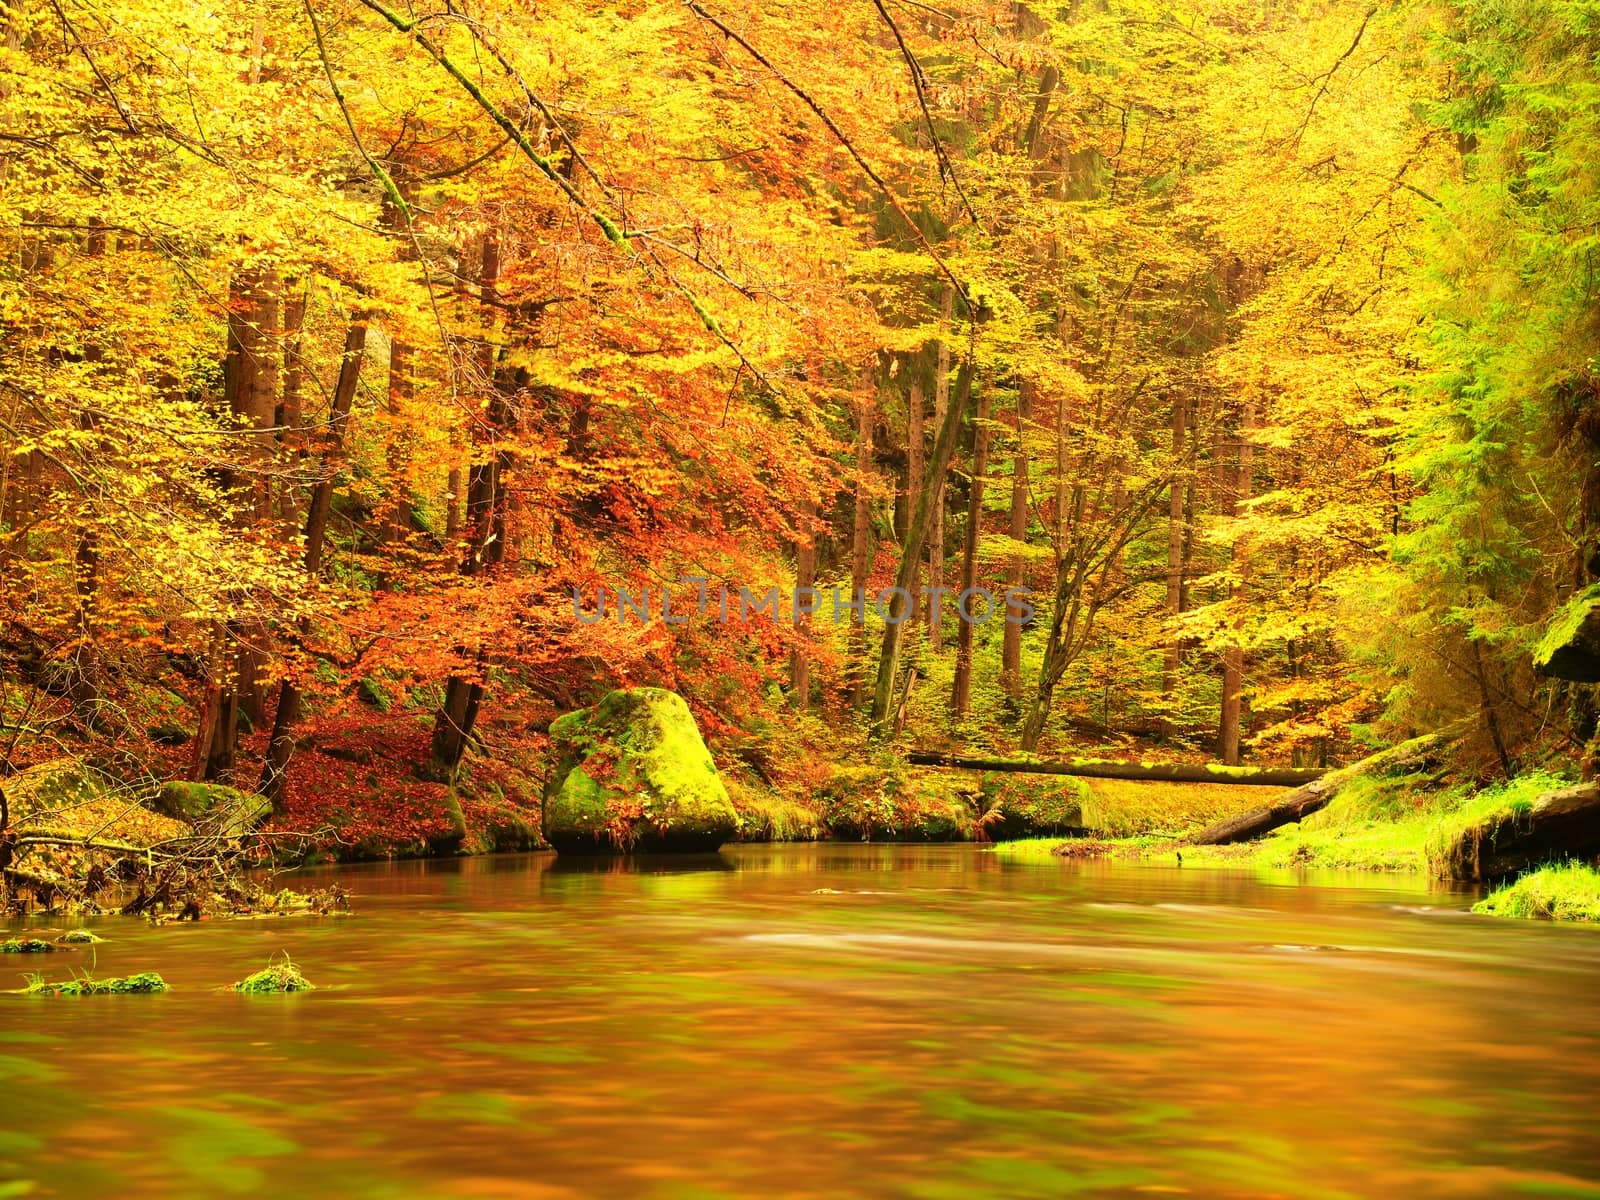 Autumn nature. Mountain river in colorful leaves forest . by rdonar2